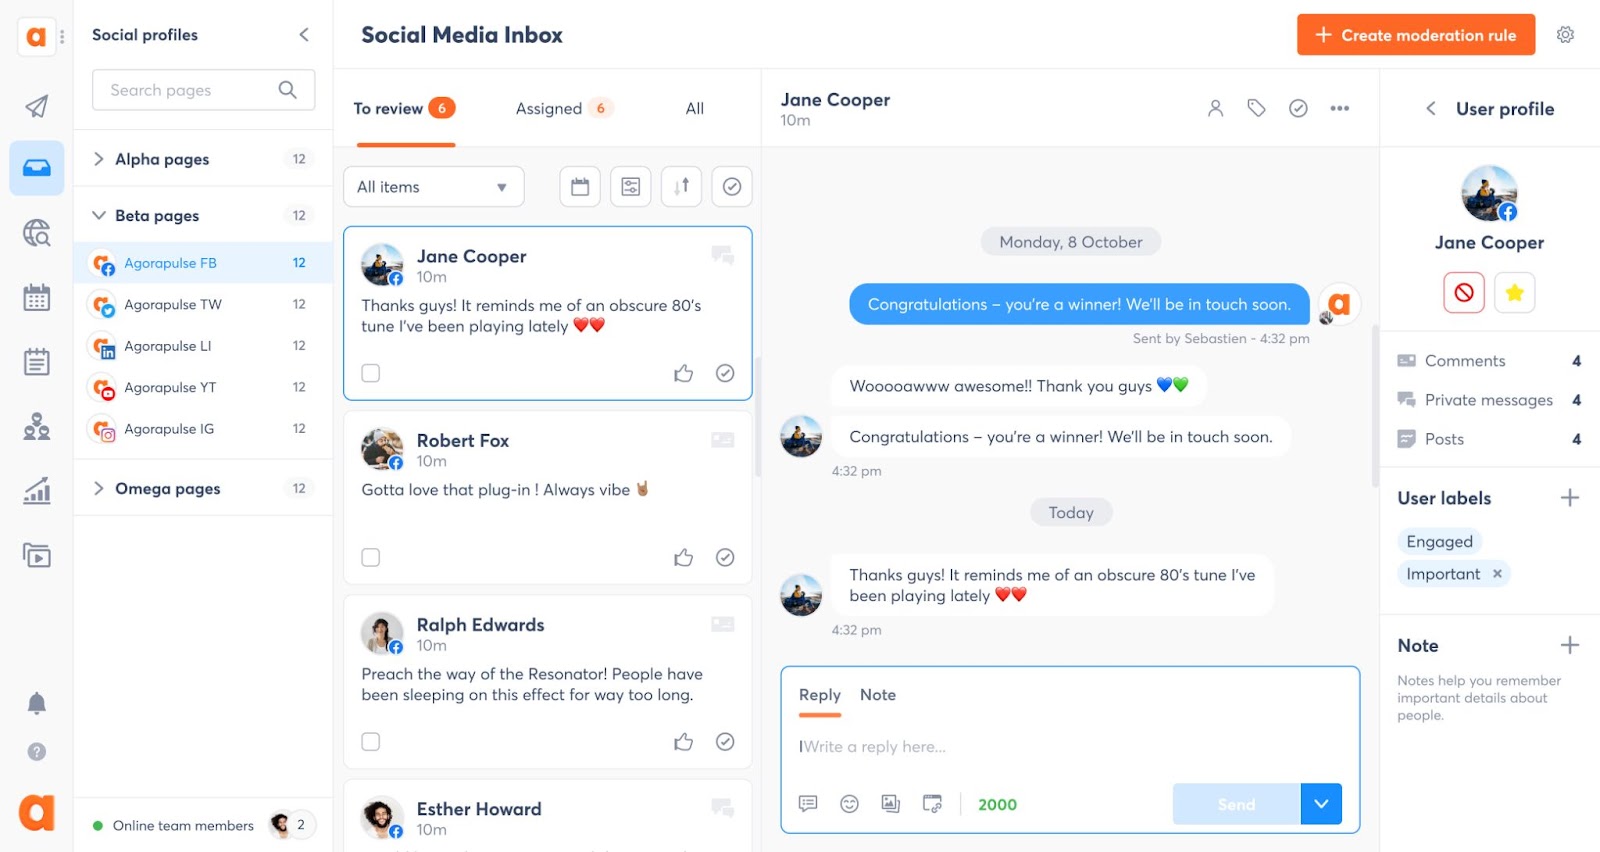 Agorapulse's social media inbox; there's a conversation thread displayed in the middle, and a CRM profile on the right. 